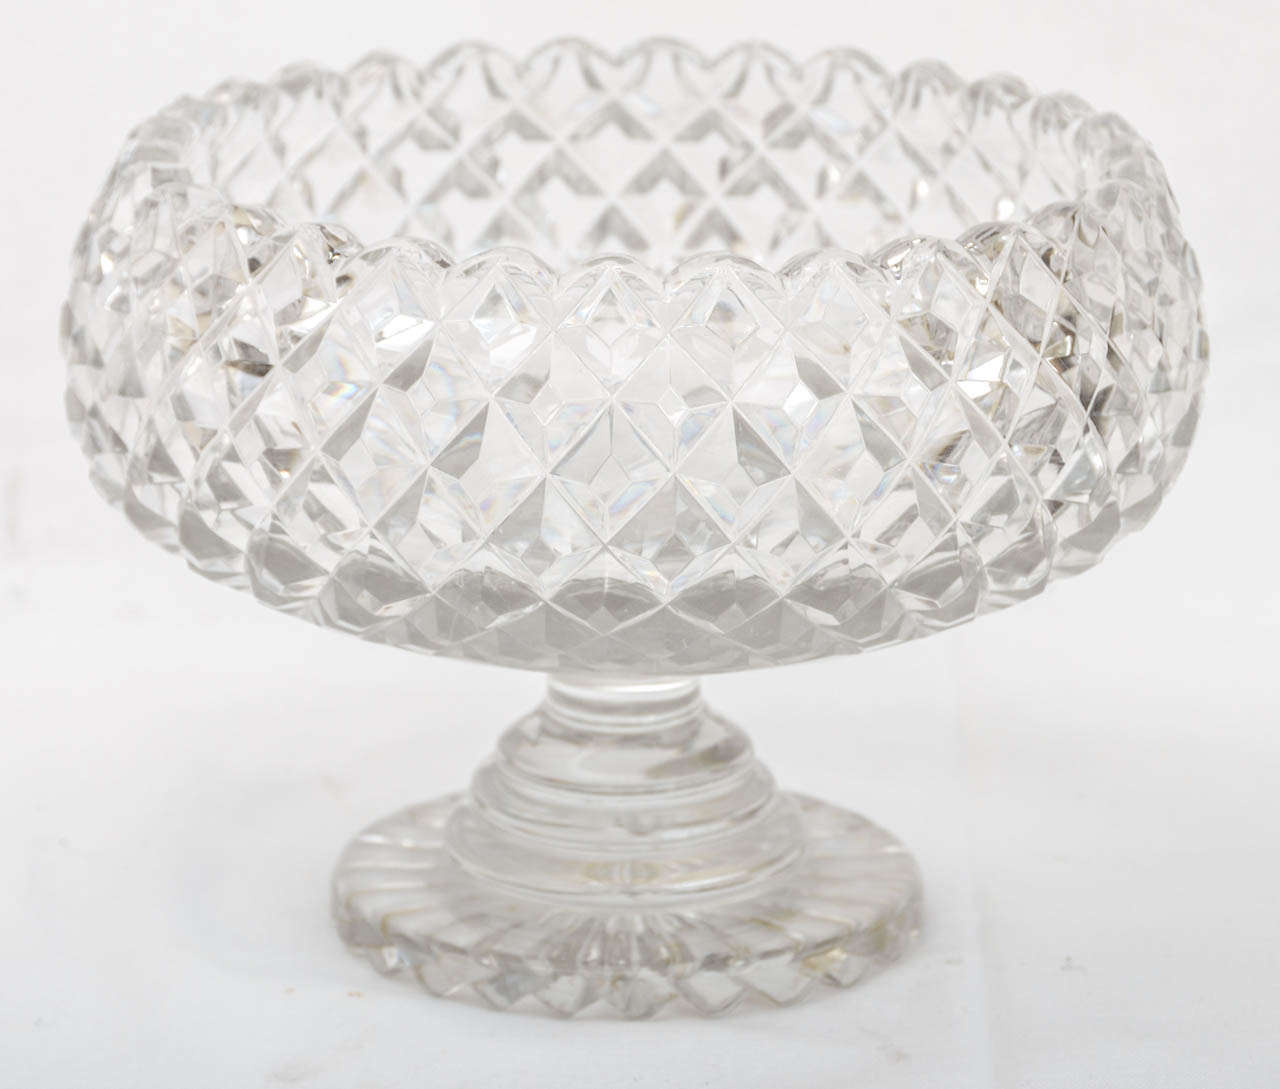 English Victorian Crystal Cut Glass Pedestal Fruit Bowl -- Round Curved Sided With Cut Diamond Pattern And Saw Tooth Edge. Base Has A Cut Under Side Star Burst Pattern And Tapering Bull Nose Pedestal. Very Useful And Decorative.